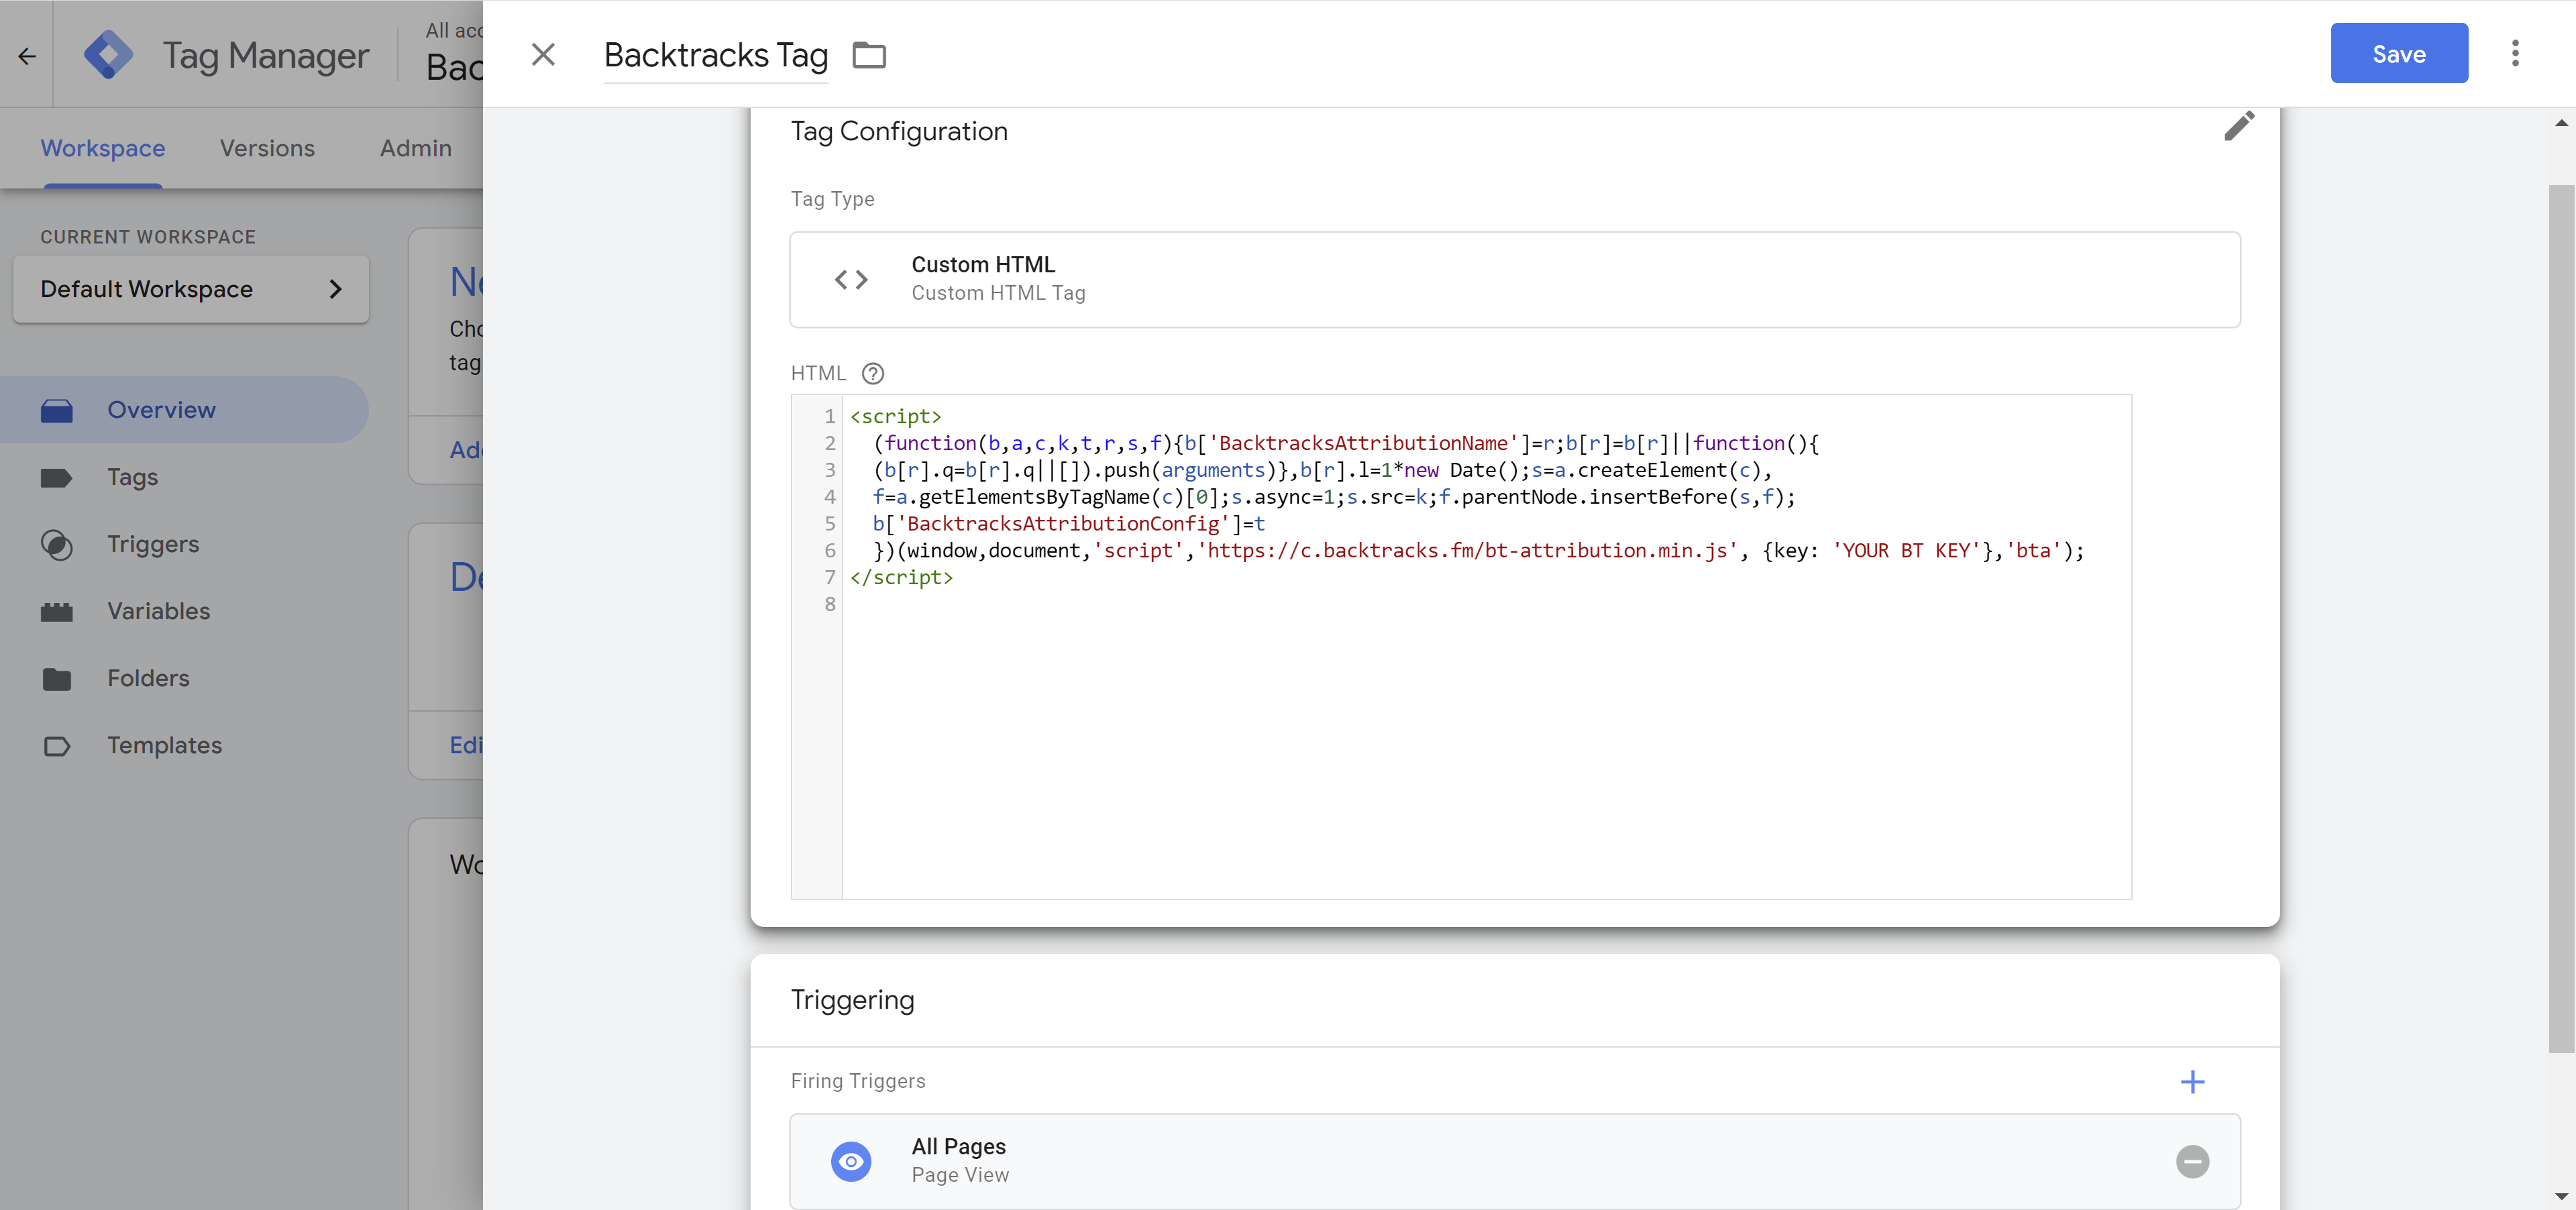 Google Tag Manager Final Preview and Save